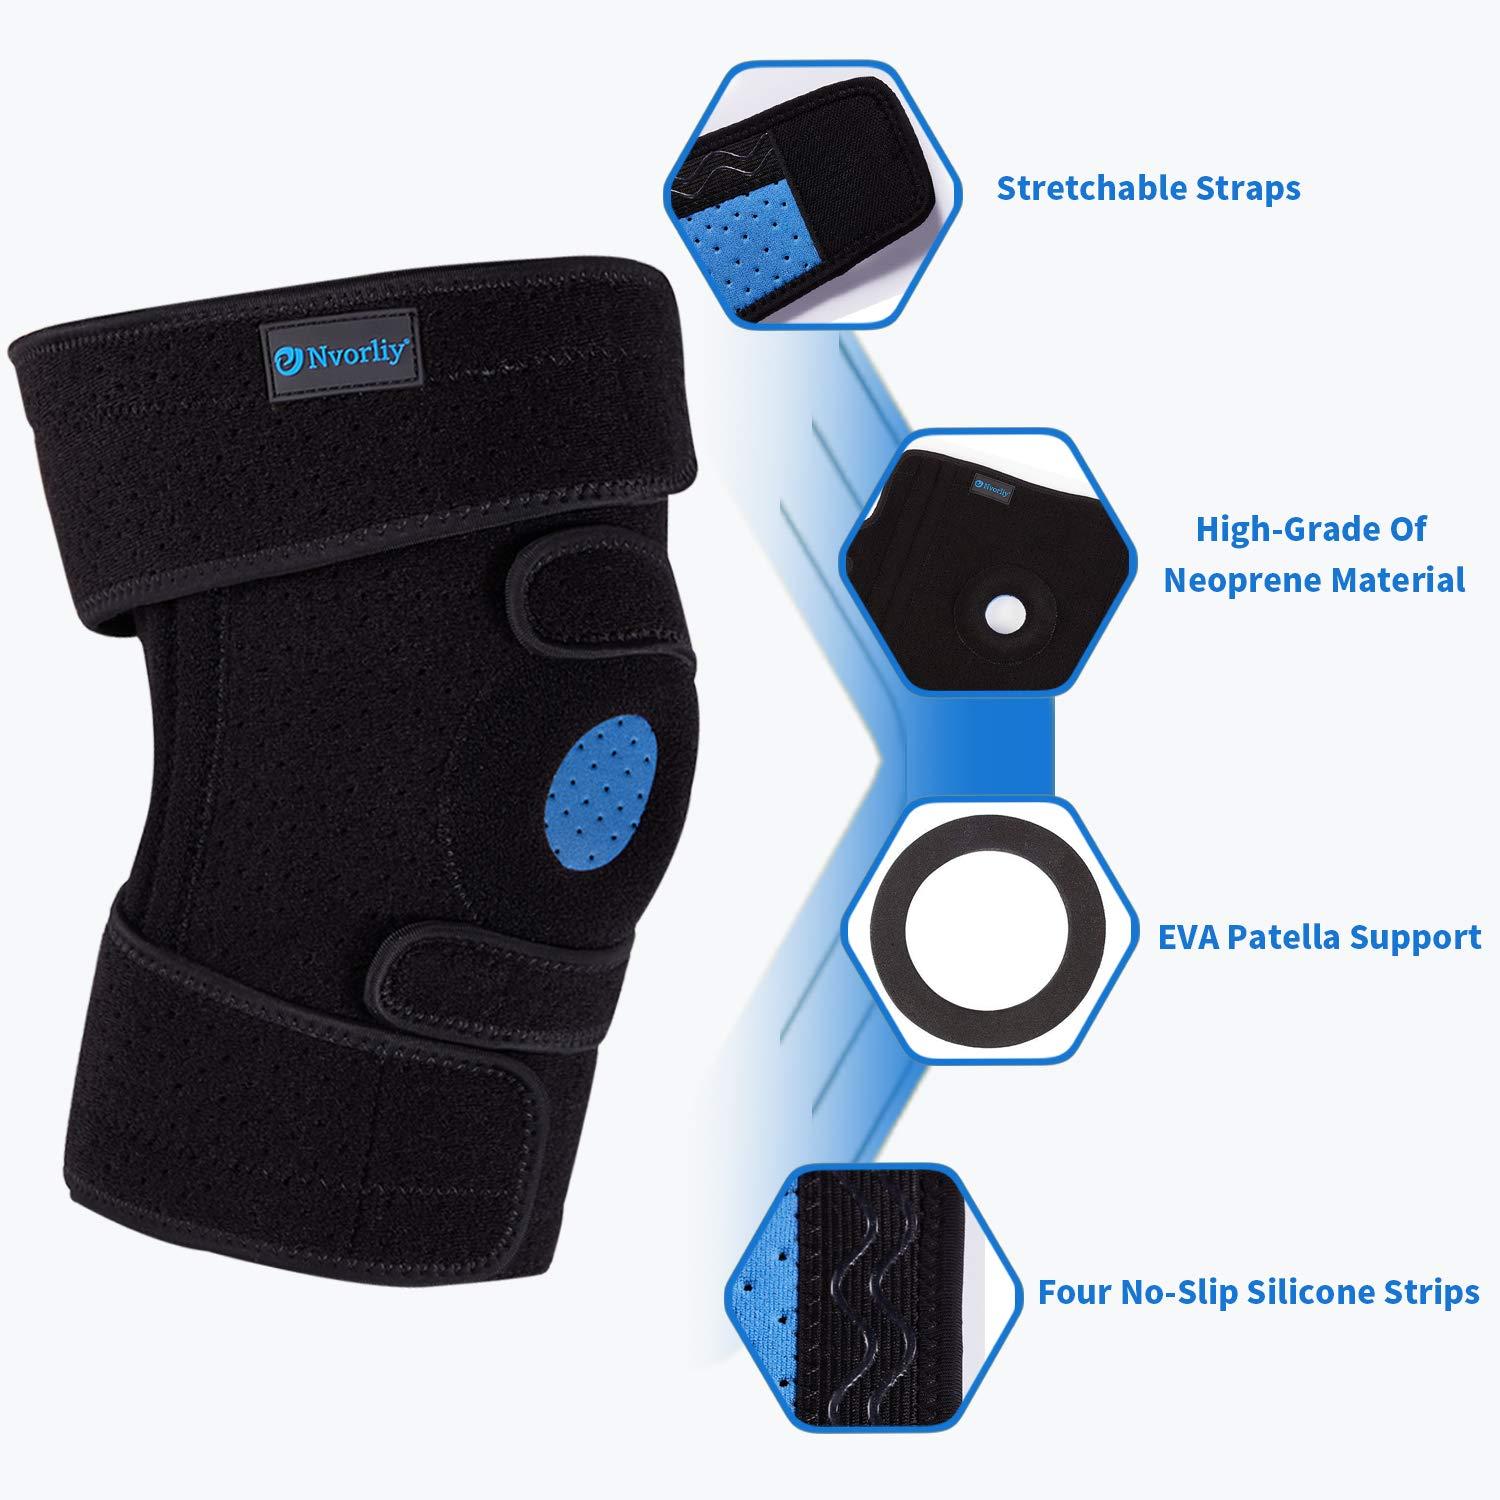 Nvorliy Plus Size Adjustable Knee Brace - Lengthened and Widened Design,  Extra Large Open Patella Knee Support for Running, Sports, Arthritis, ACL,  LCL, MCL, Pain Relief, Fit Women & Men (3XL/4XL, Black)